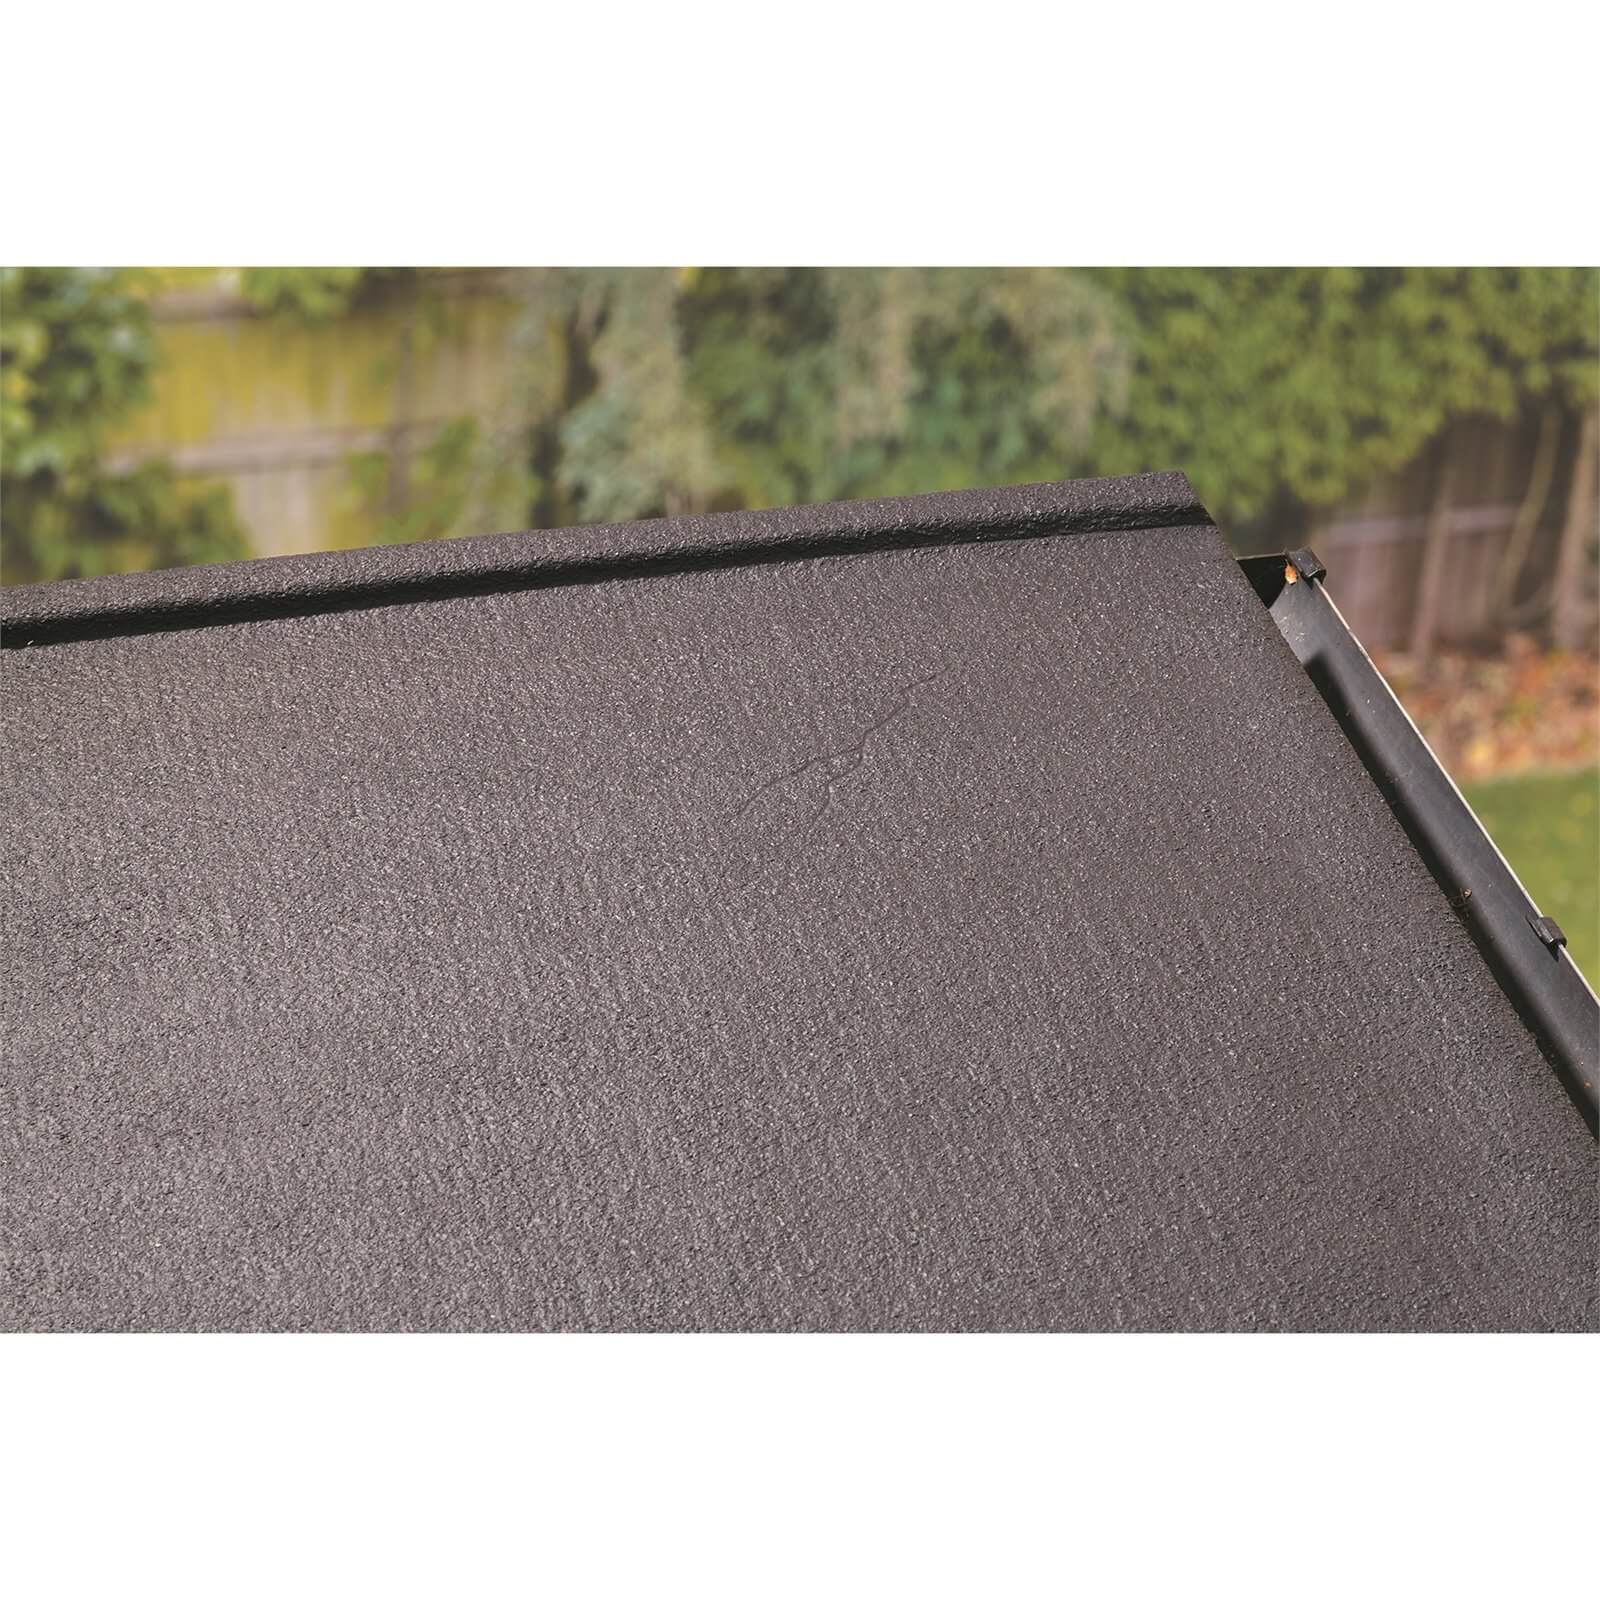 Thompson's 10 Year Roof Seal - Black - 4L